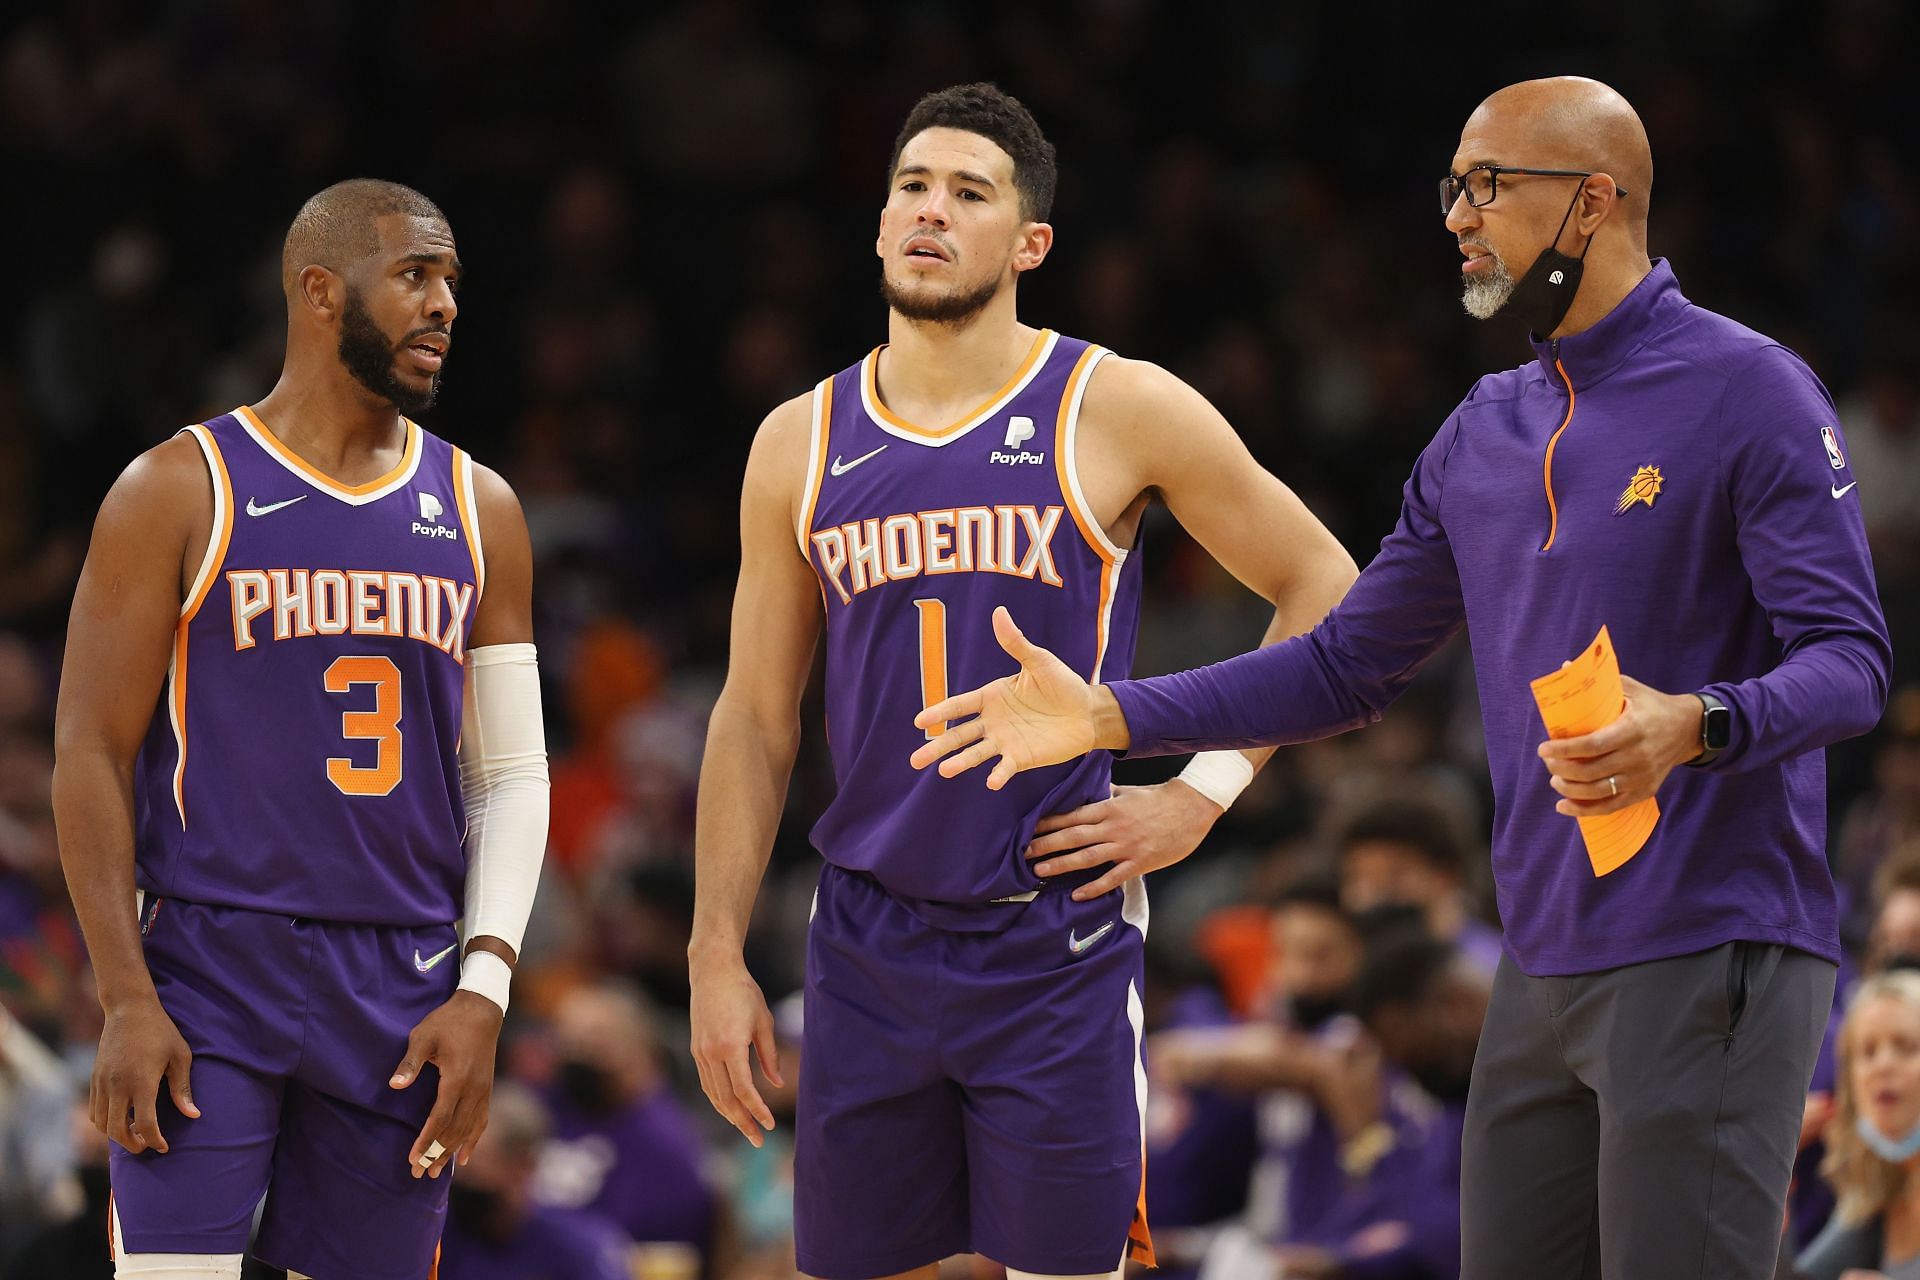 Chris Paul, Devin Booker and Monty Williams of the Phoenix Suns